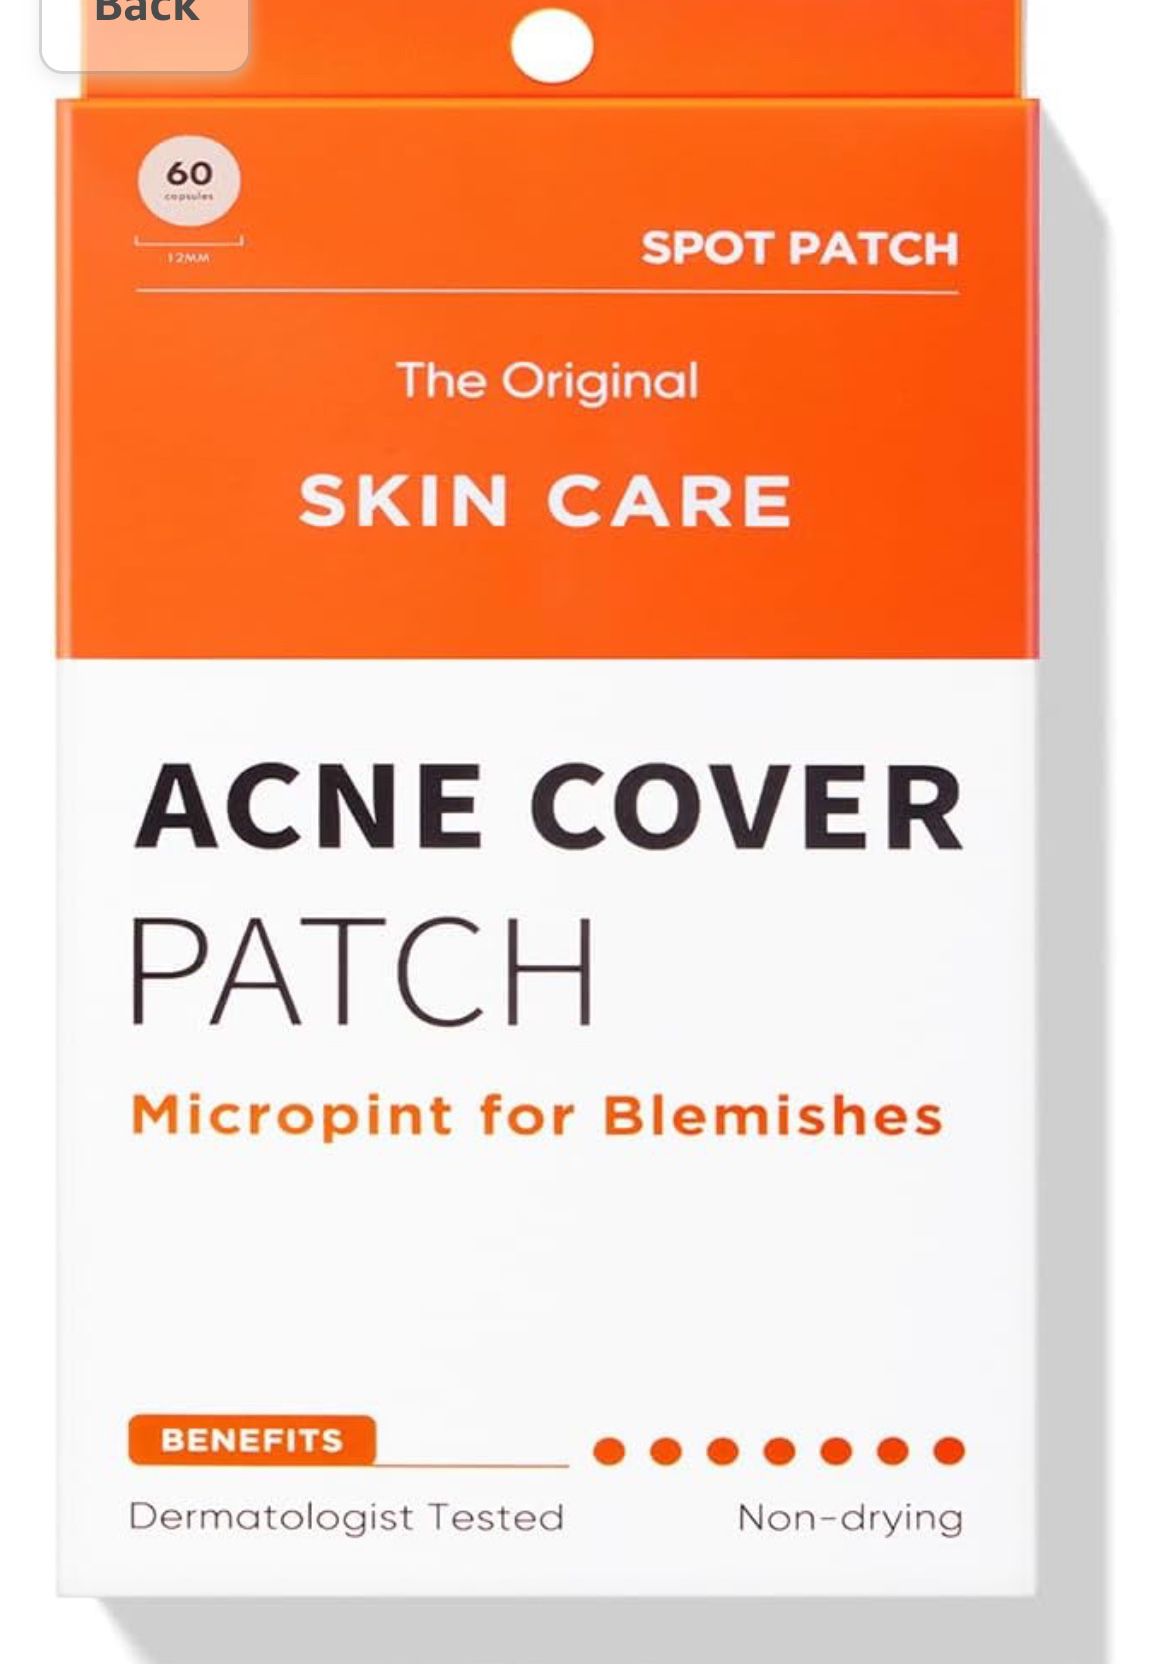  Acne Pimple Patches(60 Count), Hydrocolloid Acne Patch for Face, Acne Spot Dots Fast Healing, Blemish Cover, Pimple Patch For Blemishes,